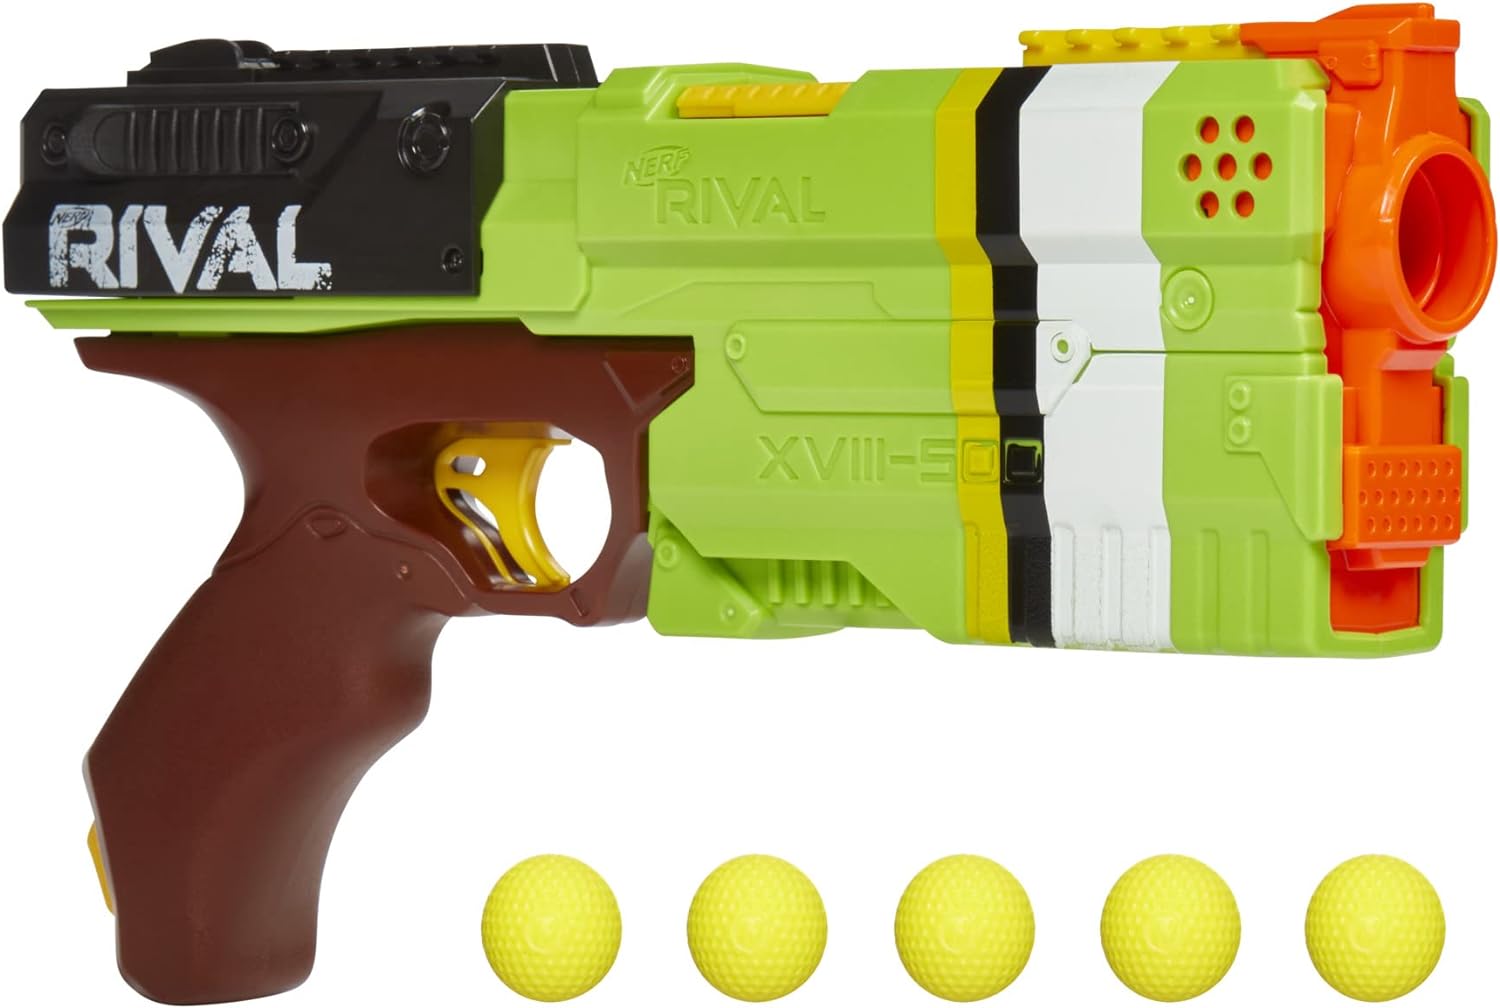 The NERF Rival Kronos XVIII-500 can be a lot of fun to play with, especially for those who enjoy competitive and fast-paced shooting games. Here are some reasons why it can be enjoyable:1. Precision and Accuracy: NERF Rival blasters are known for their accuracy and precision, making it satisfying to aim and shoot at targets or opponents.2. High-Quality Build: The Kronos XVIII-500 is typically well-built and durable, designed for intense play and capable of withstanding rough handling.3. Competit